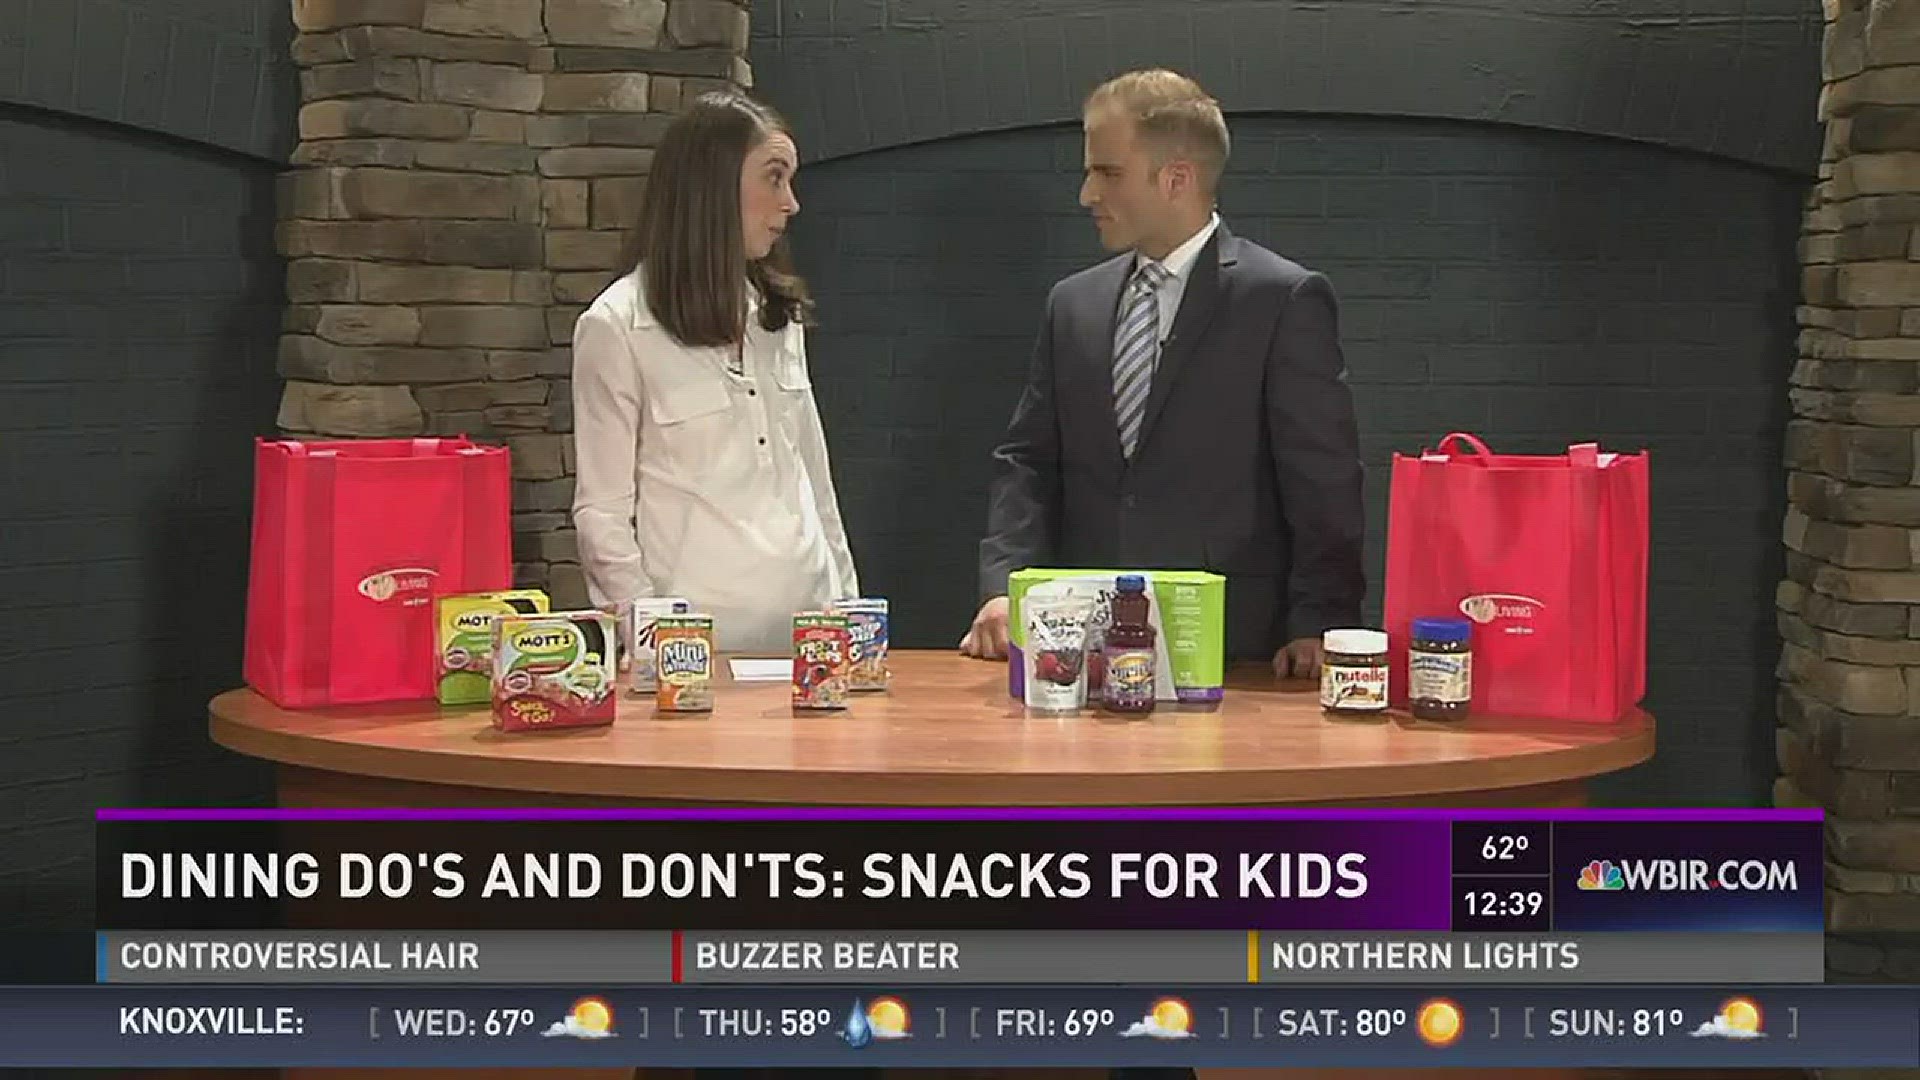 Dietitian Janet Siebert with UT Medical Center's Healthy Living Kitchen shows us how to choose healthy snacks for kids.